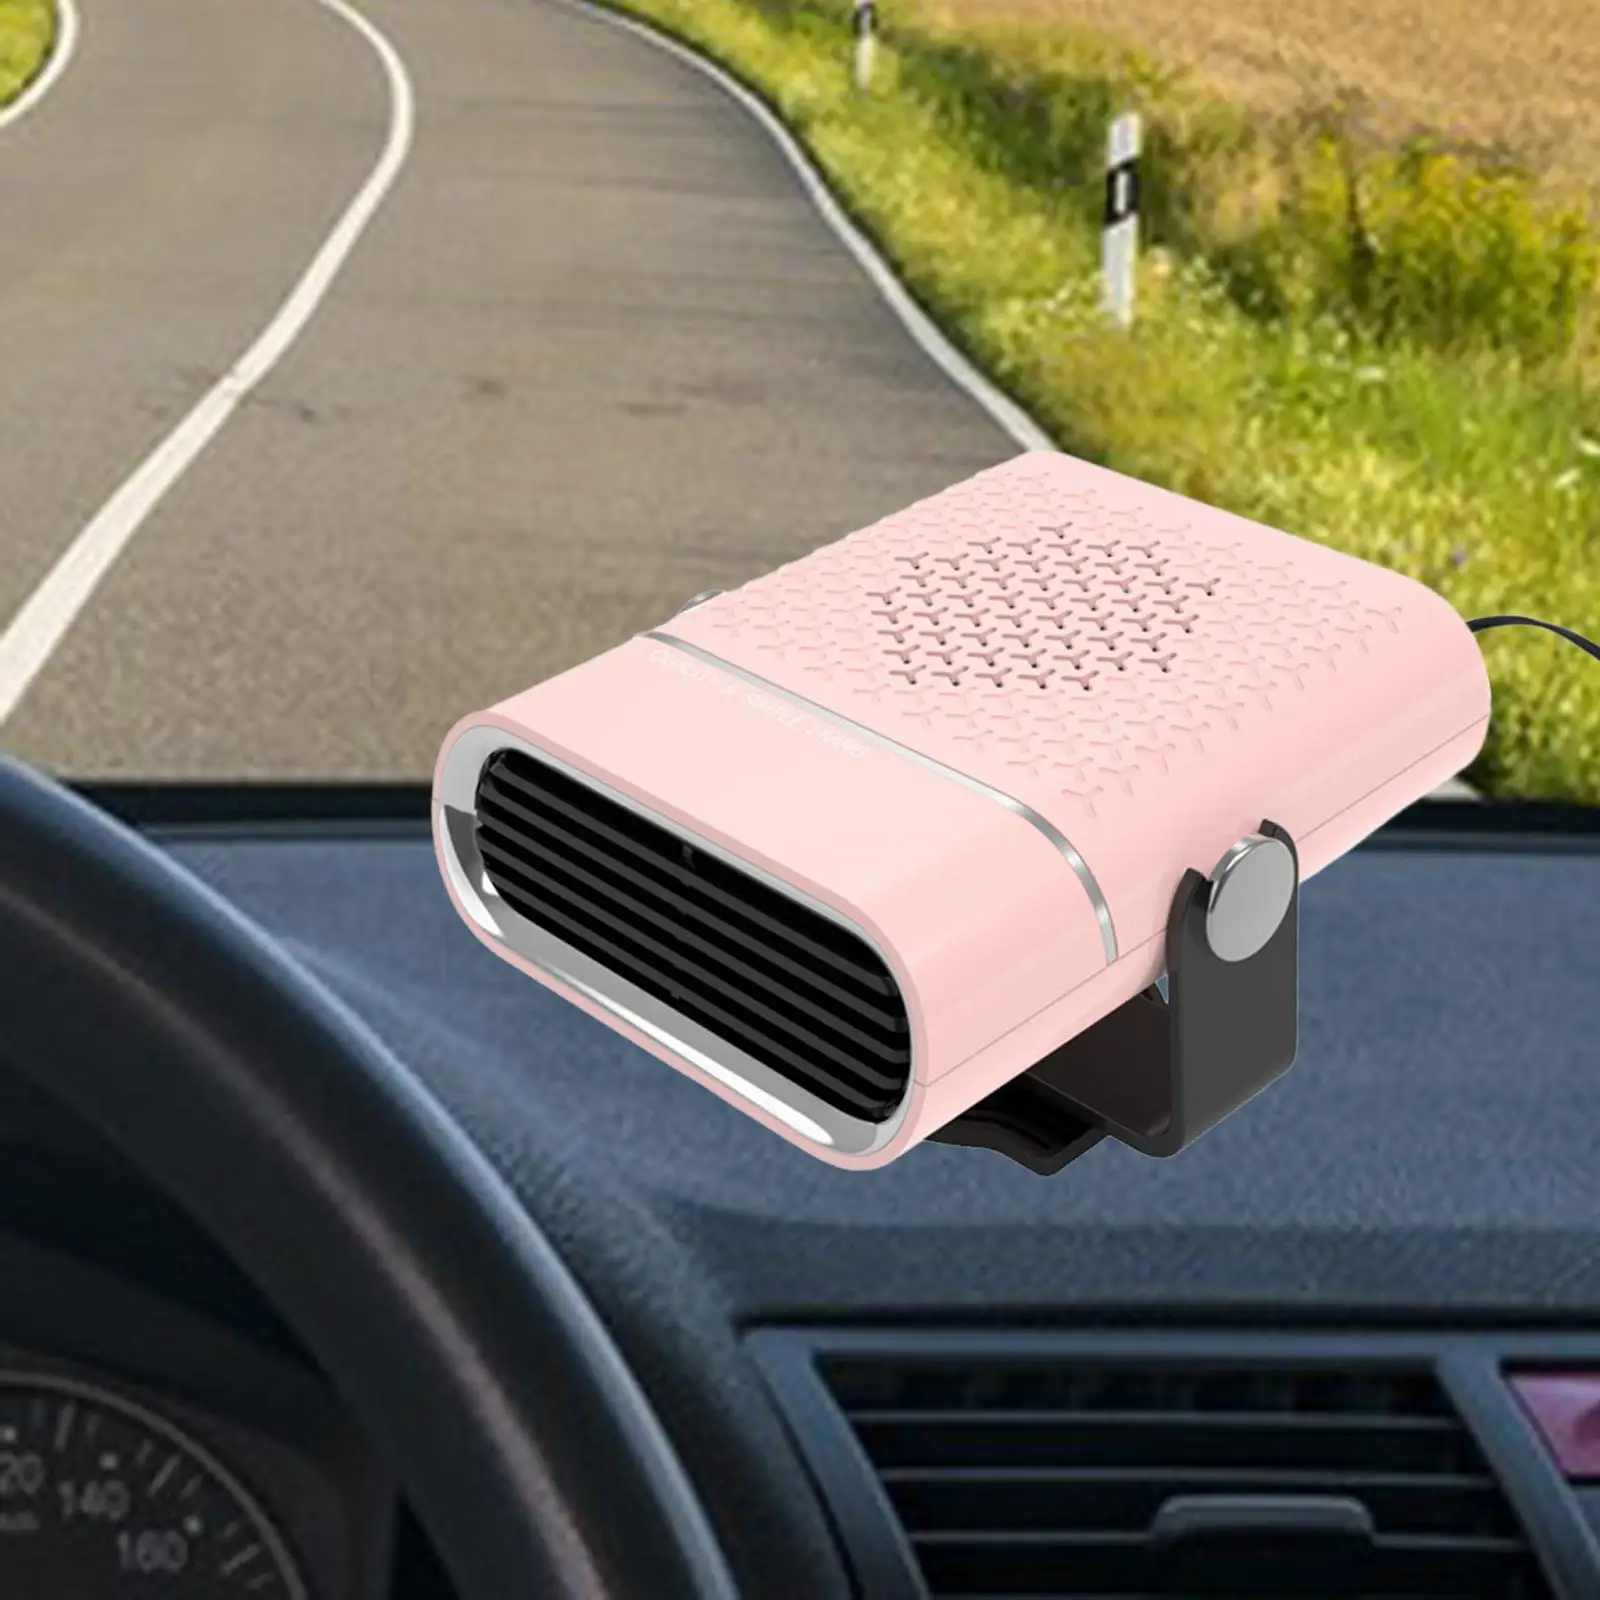 Car Heater for Winter Compact Windshield Defroster Demister Plug into Cigarette Lighter 260W Car Fan Heater Auto Vehicle Heater